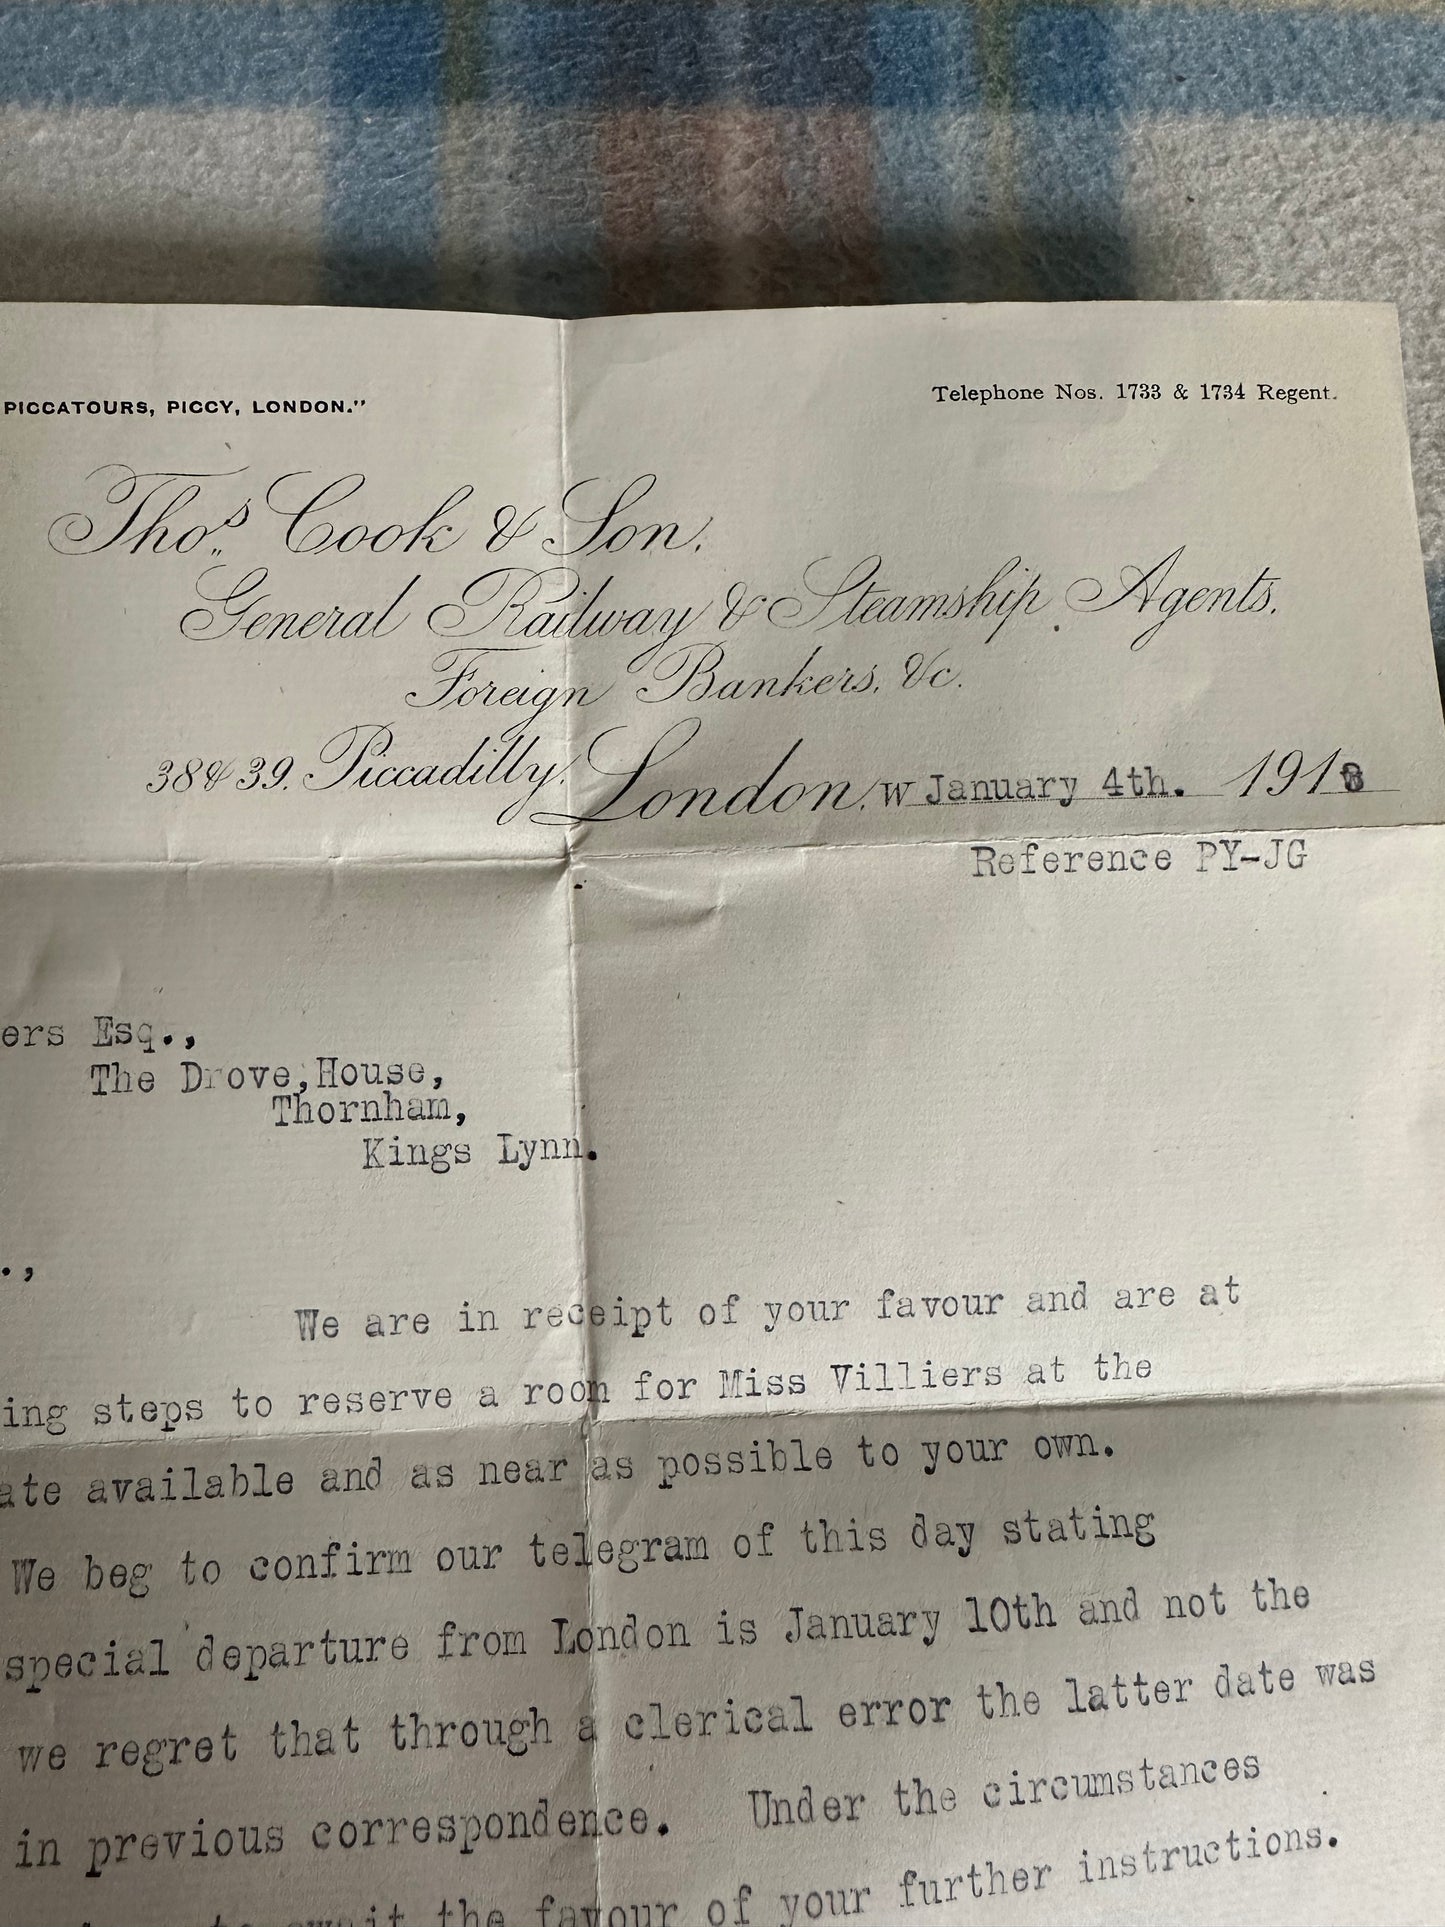 1913 Thomas Cook & Son very early travel letter from now closed travel agents Thomas Cook